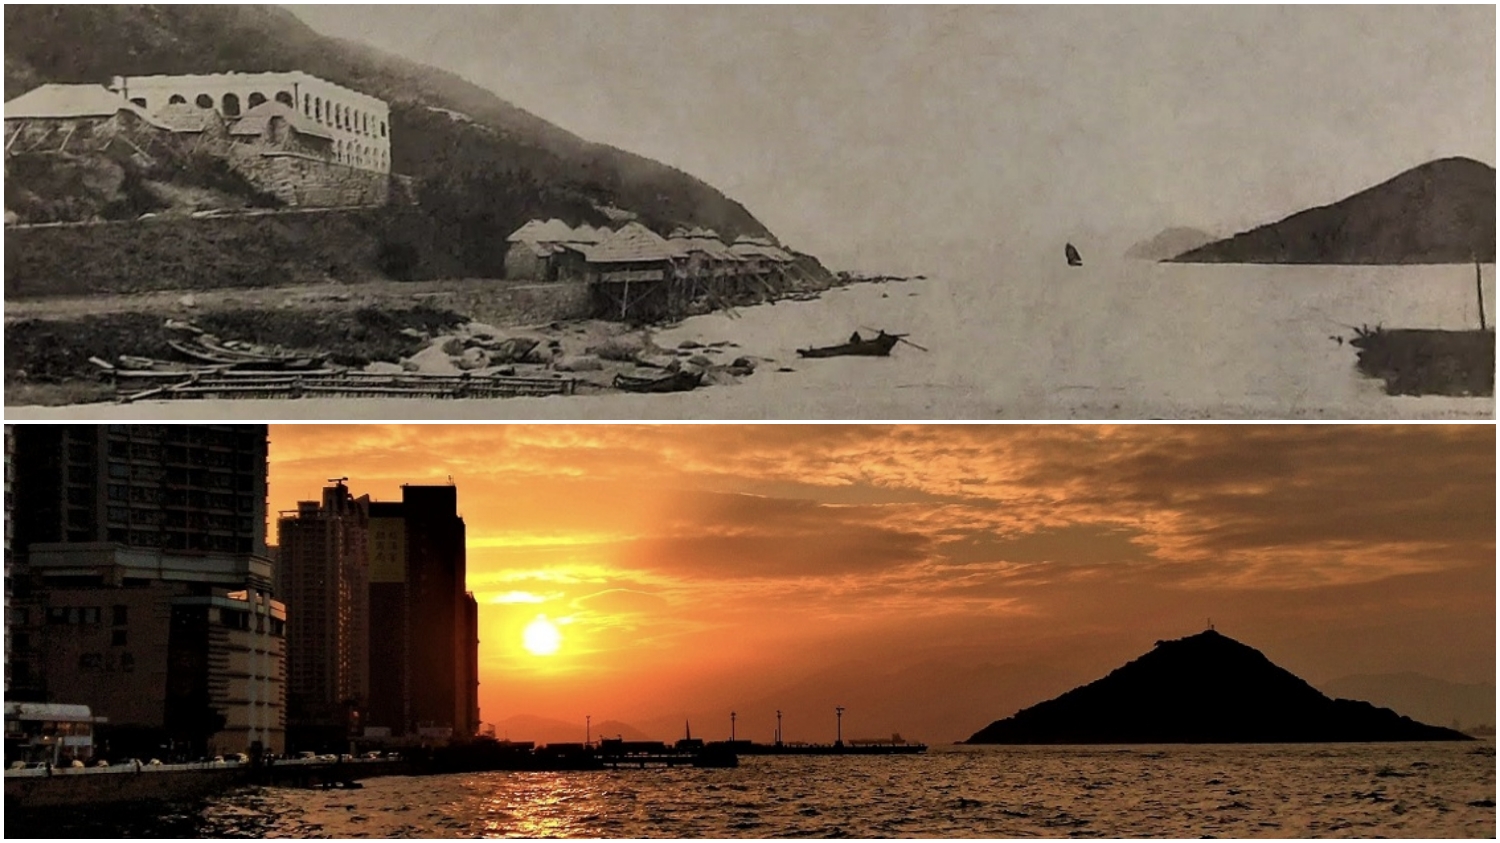 6 Hong Kong sightseeing ideas from exhibition "History Through the Lens: Photographs of Early Hong Kong" for Singapore travelers under new travel bubble and others